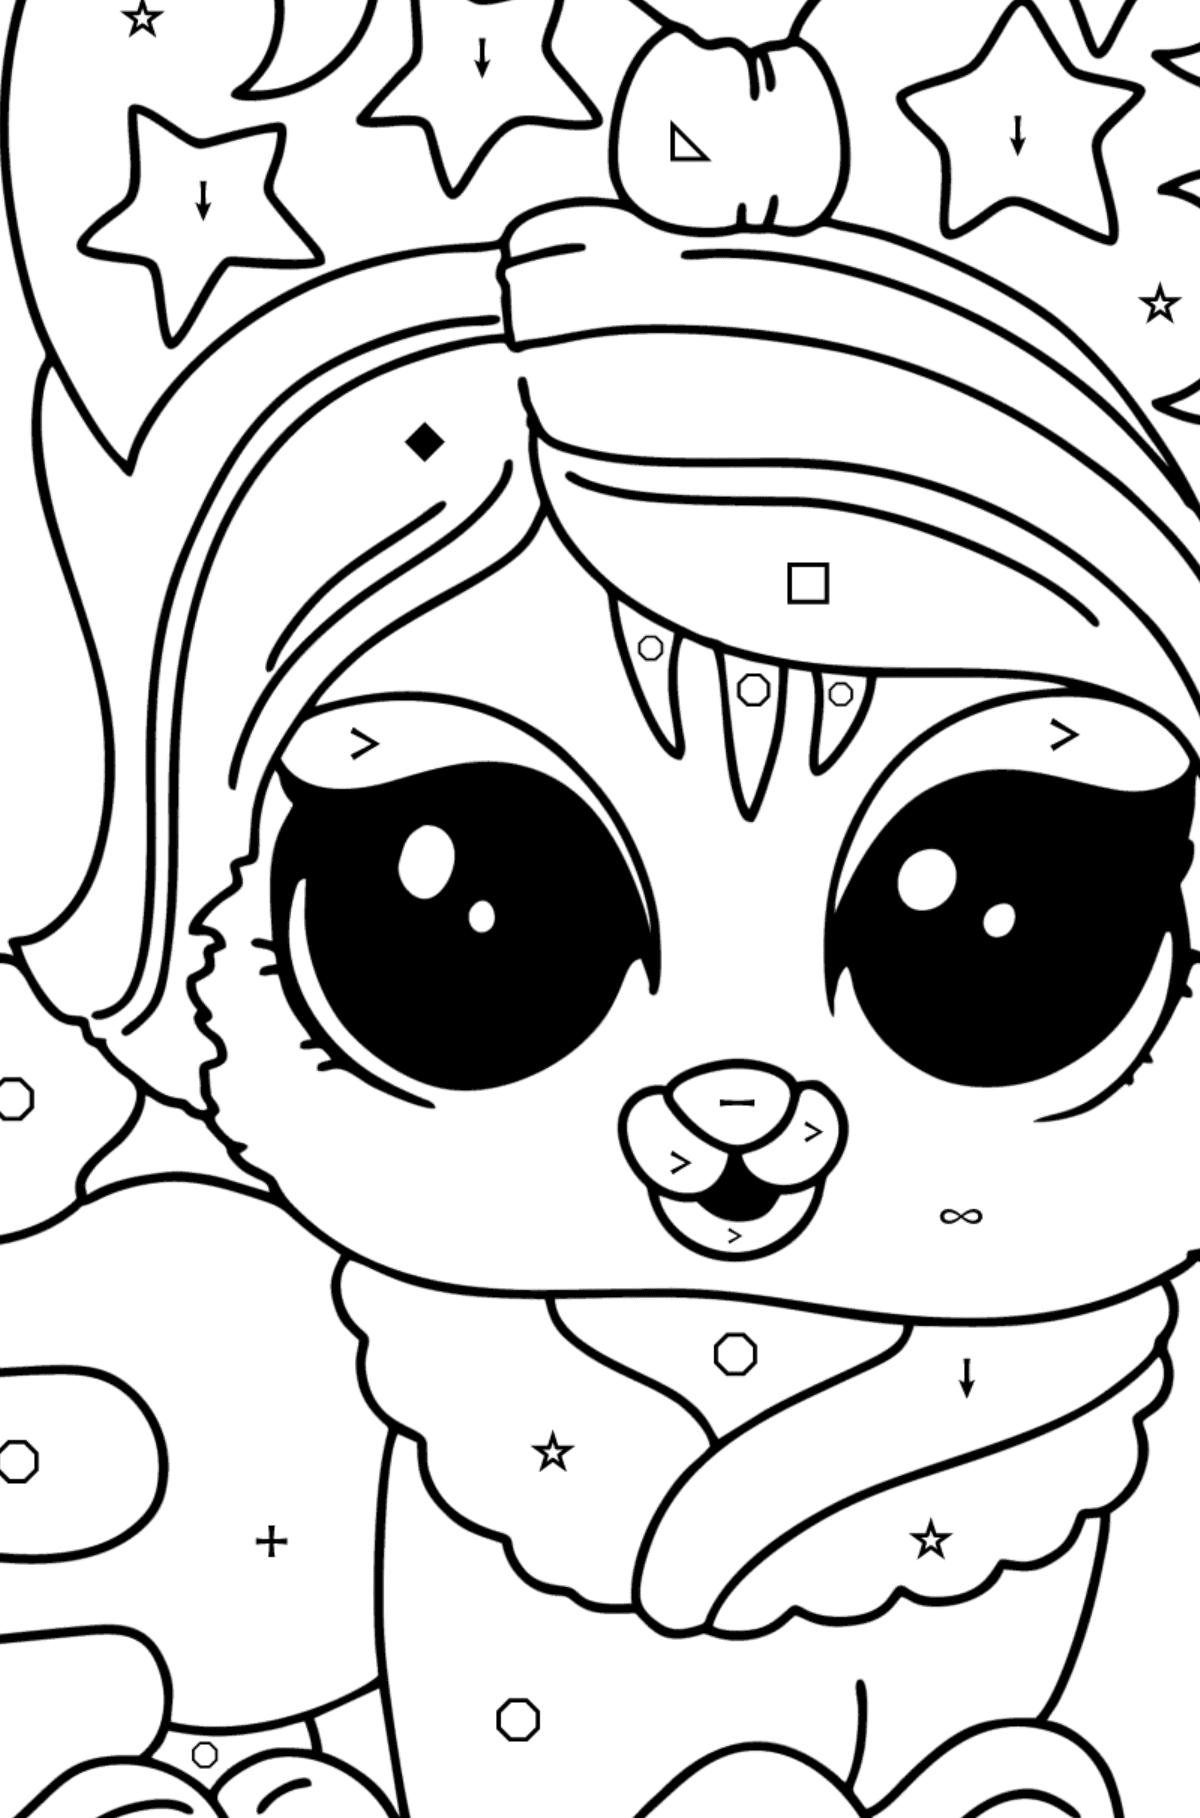 Coloring page LOL Pet Kitty - Coloring by Symbols and Geometric Shapes for Kids